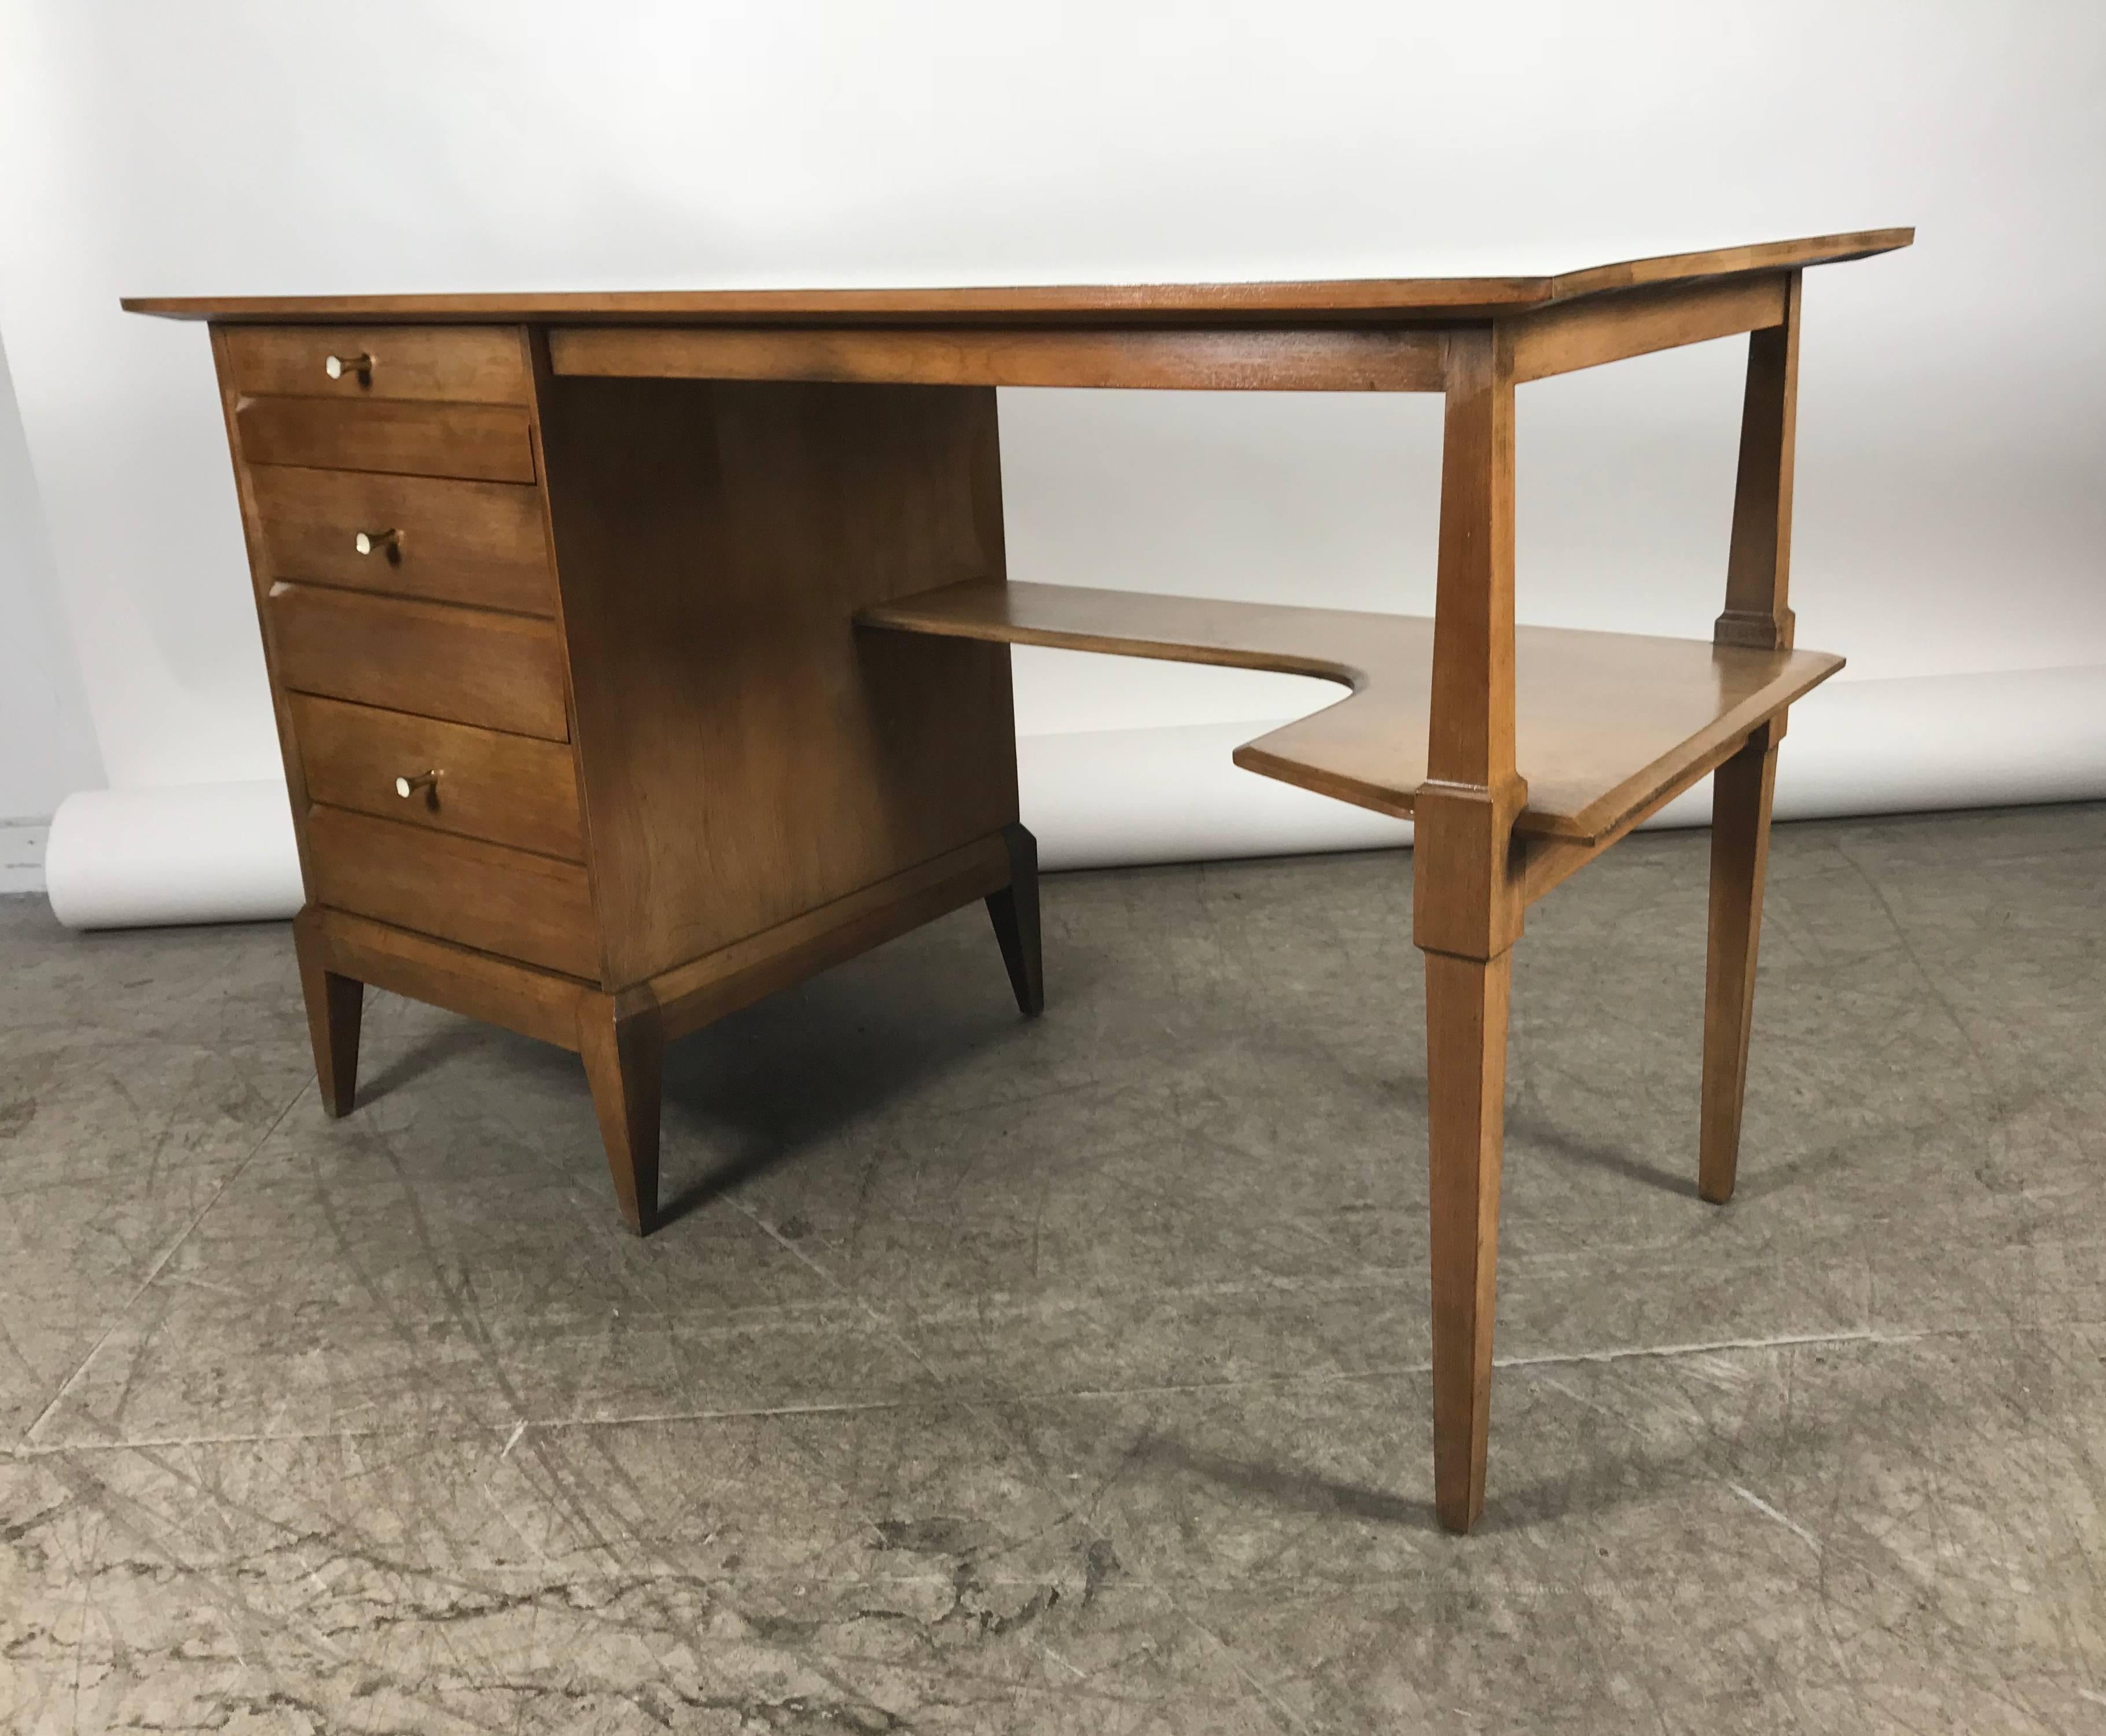 Stylized Mid-Century Modern desk by Heywood Wakefield, warm walnut finish, white laminate top, featuring three drawers and right lower shelf, stylized conical brass drawer pulls, finished back, superior quality and construction.